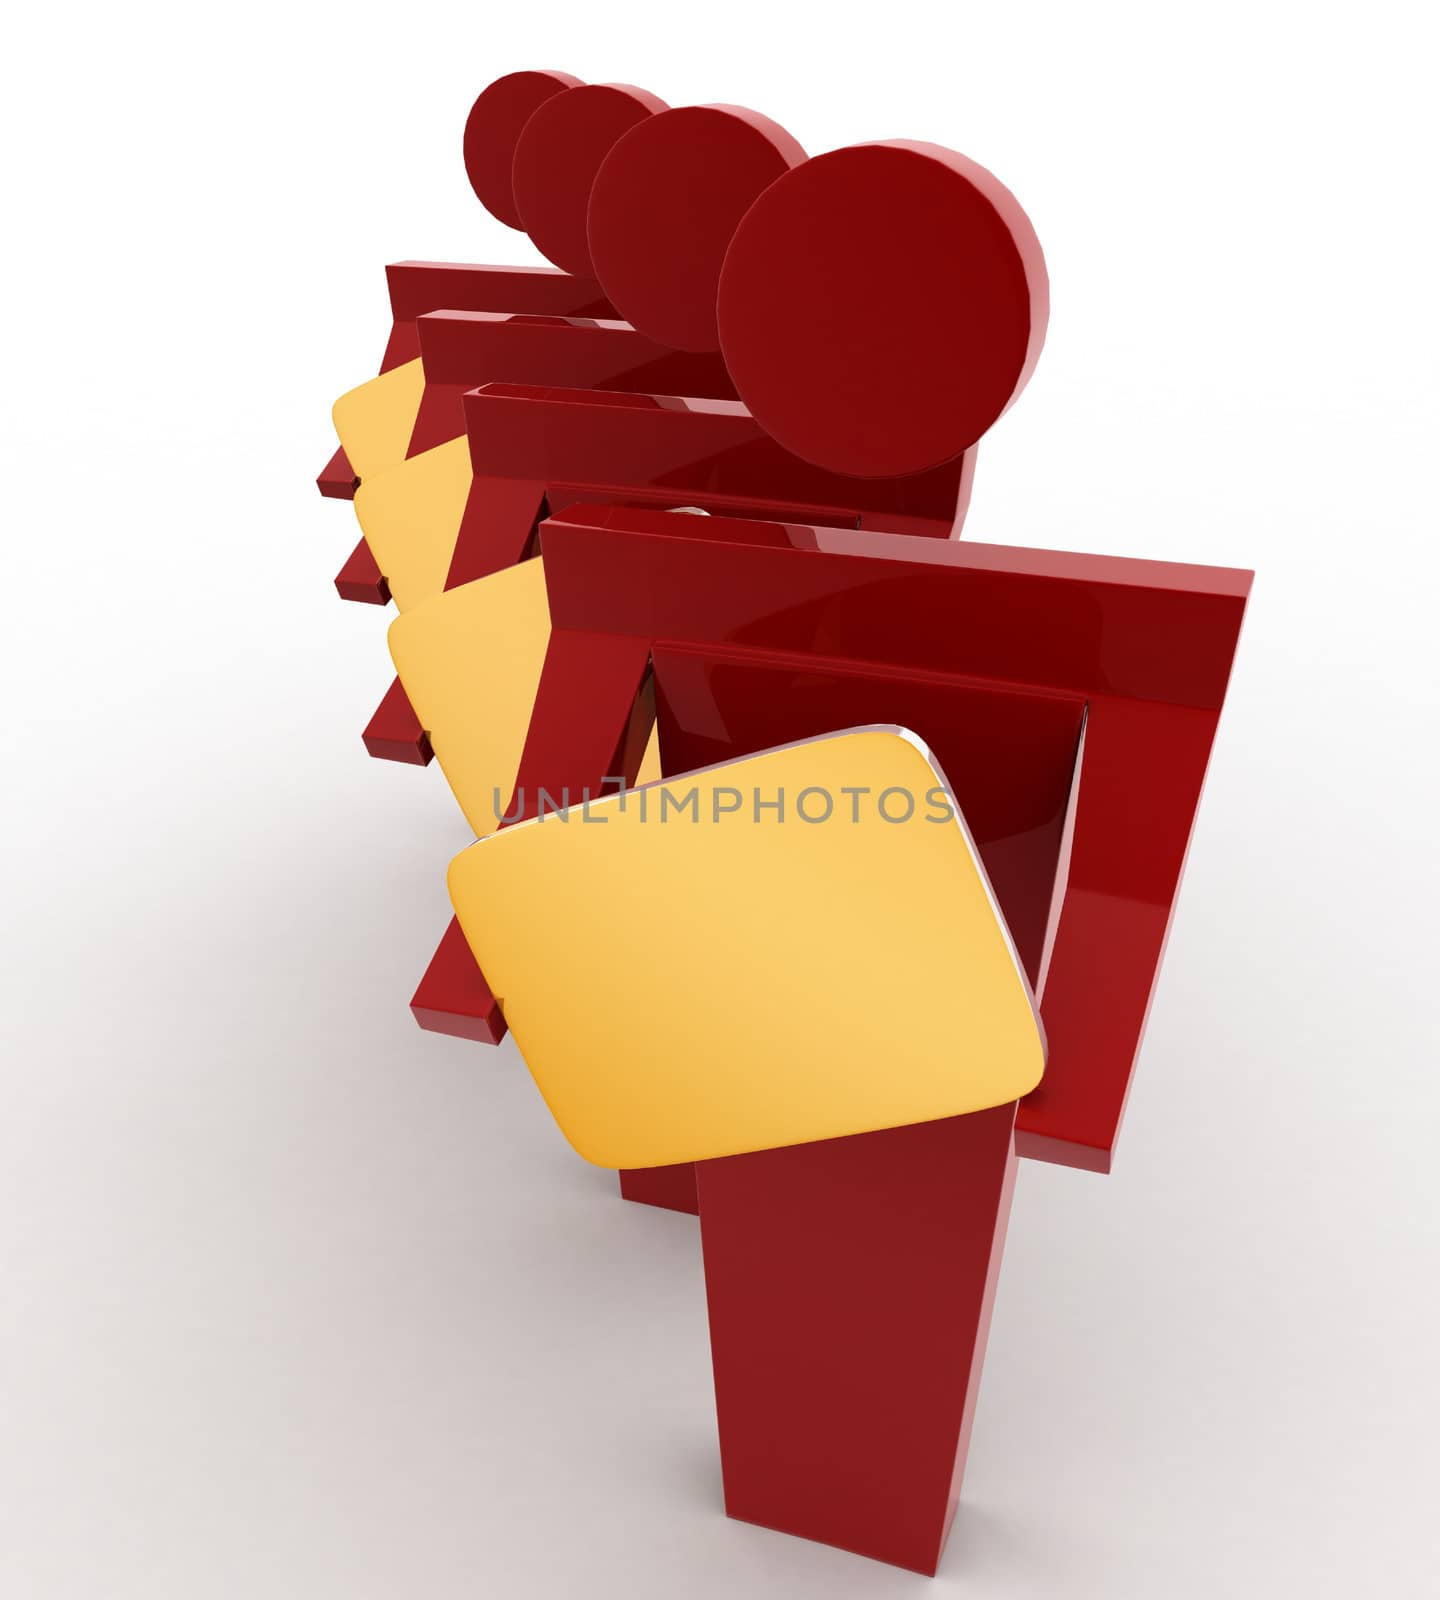 3d man with file folder in hand and standing in queue concept on white background, top angle view